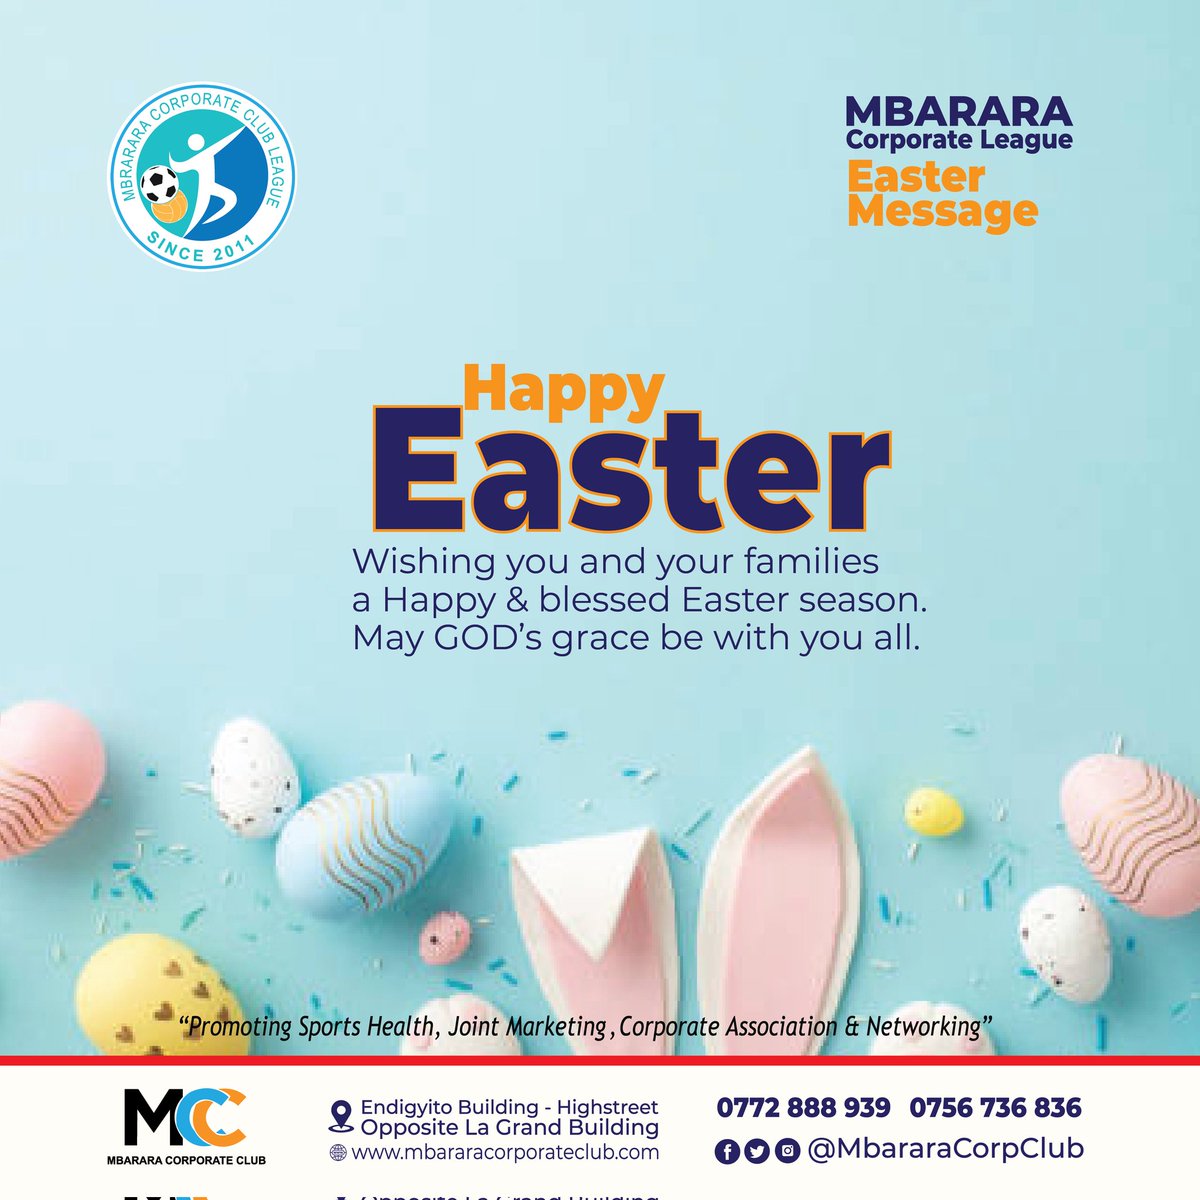 Wishing you and your families a happy and blessed #easterseason May GOD'S grace be with you all. 
#happyeaster 
#MCCBestWishes
#NBLMCCSeasob24